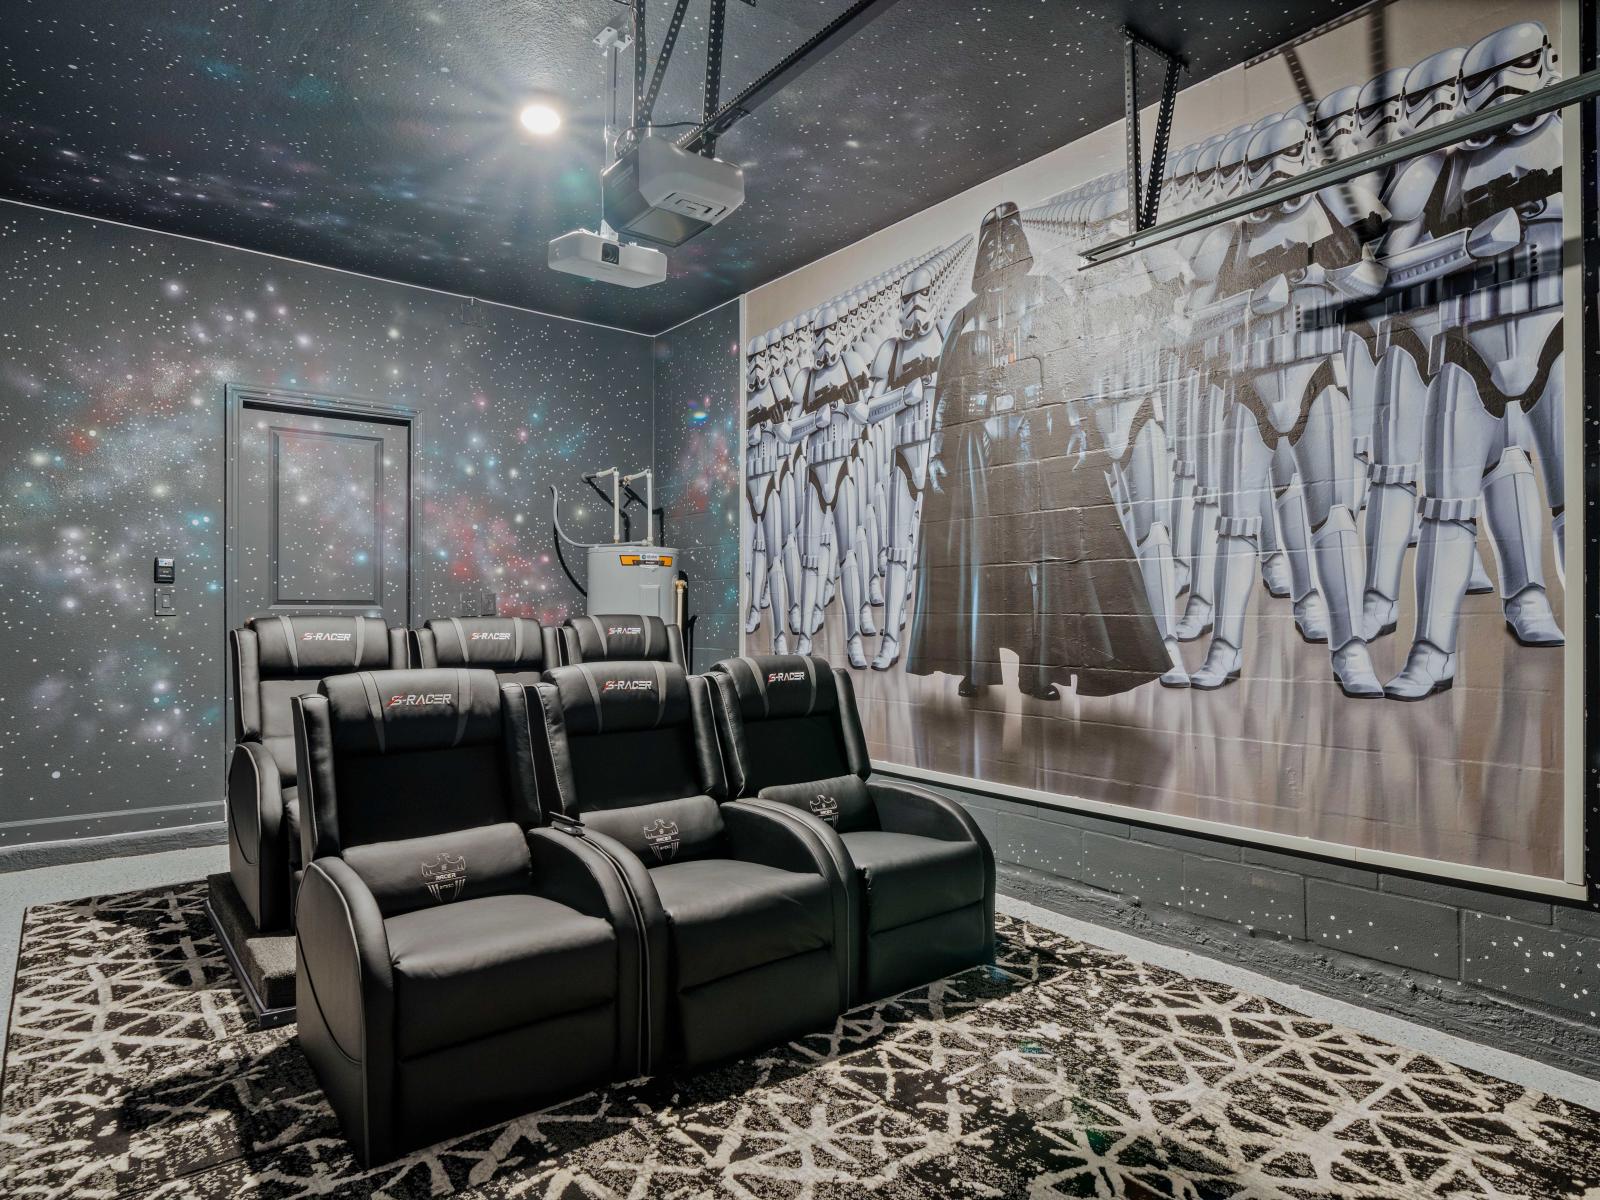 Stunning Movie Room of the Home in Davenport Florida - Cozy movie hub in our theater room - Equipped with comfortable sofas that make every movie a delightful experience